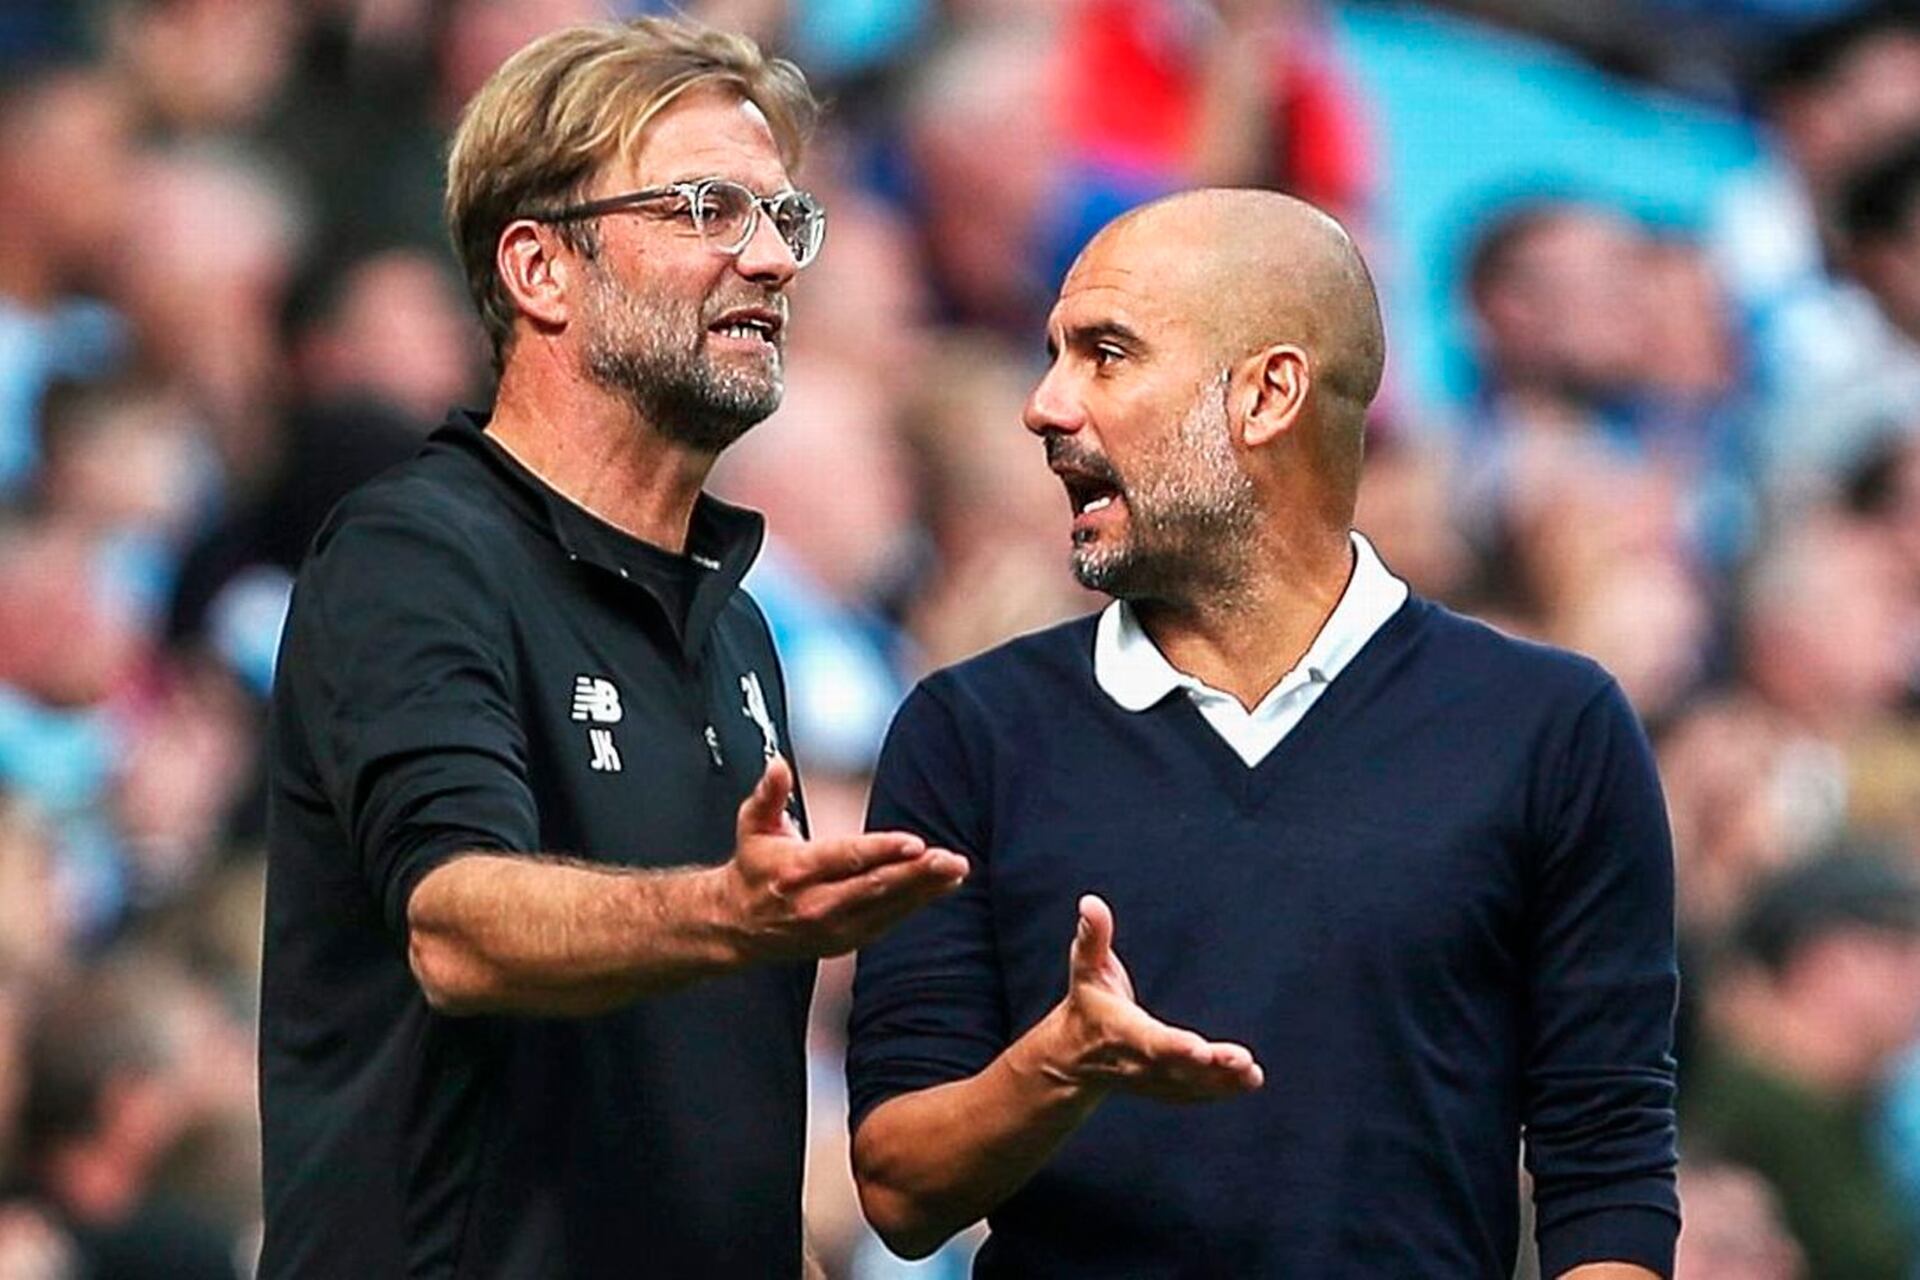 They are not taken by surprise, Klopp attentive to Guardiola's movements